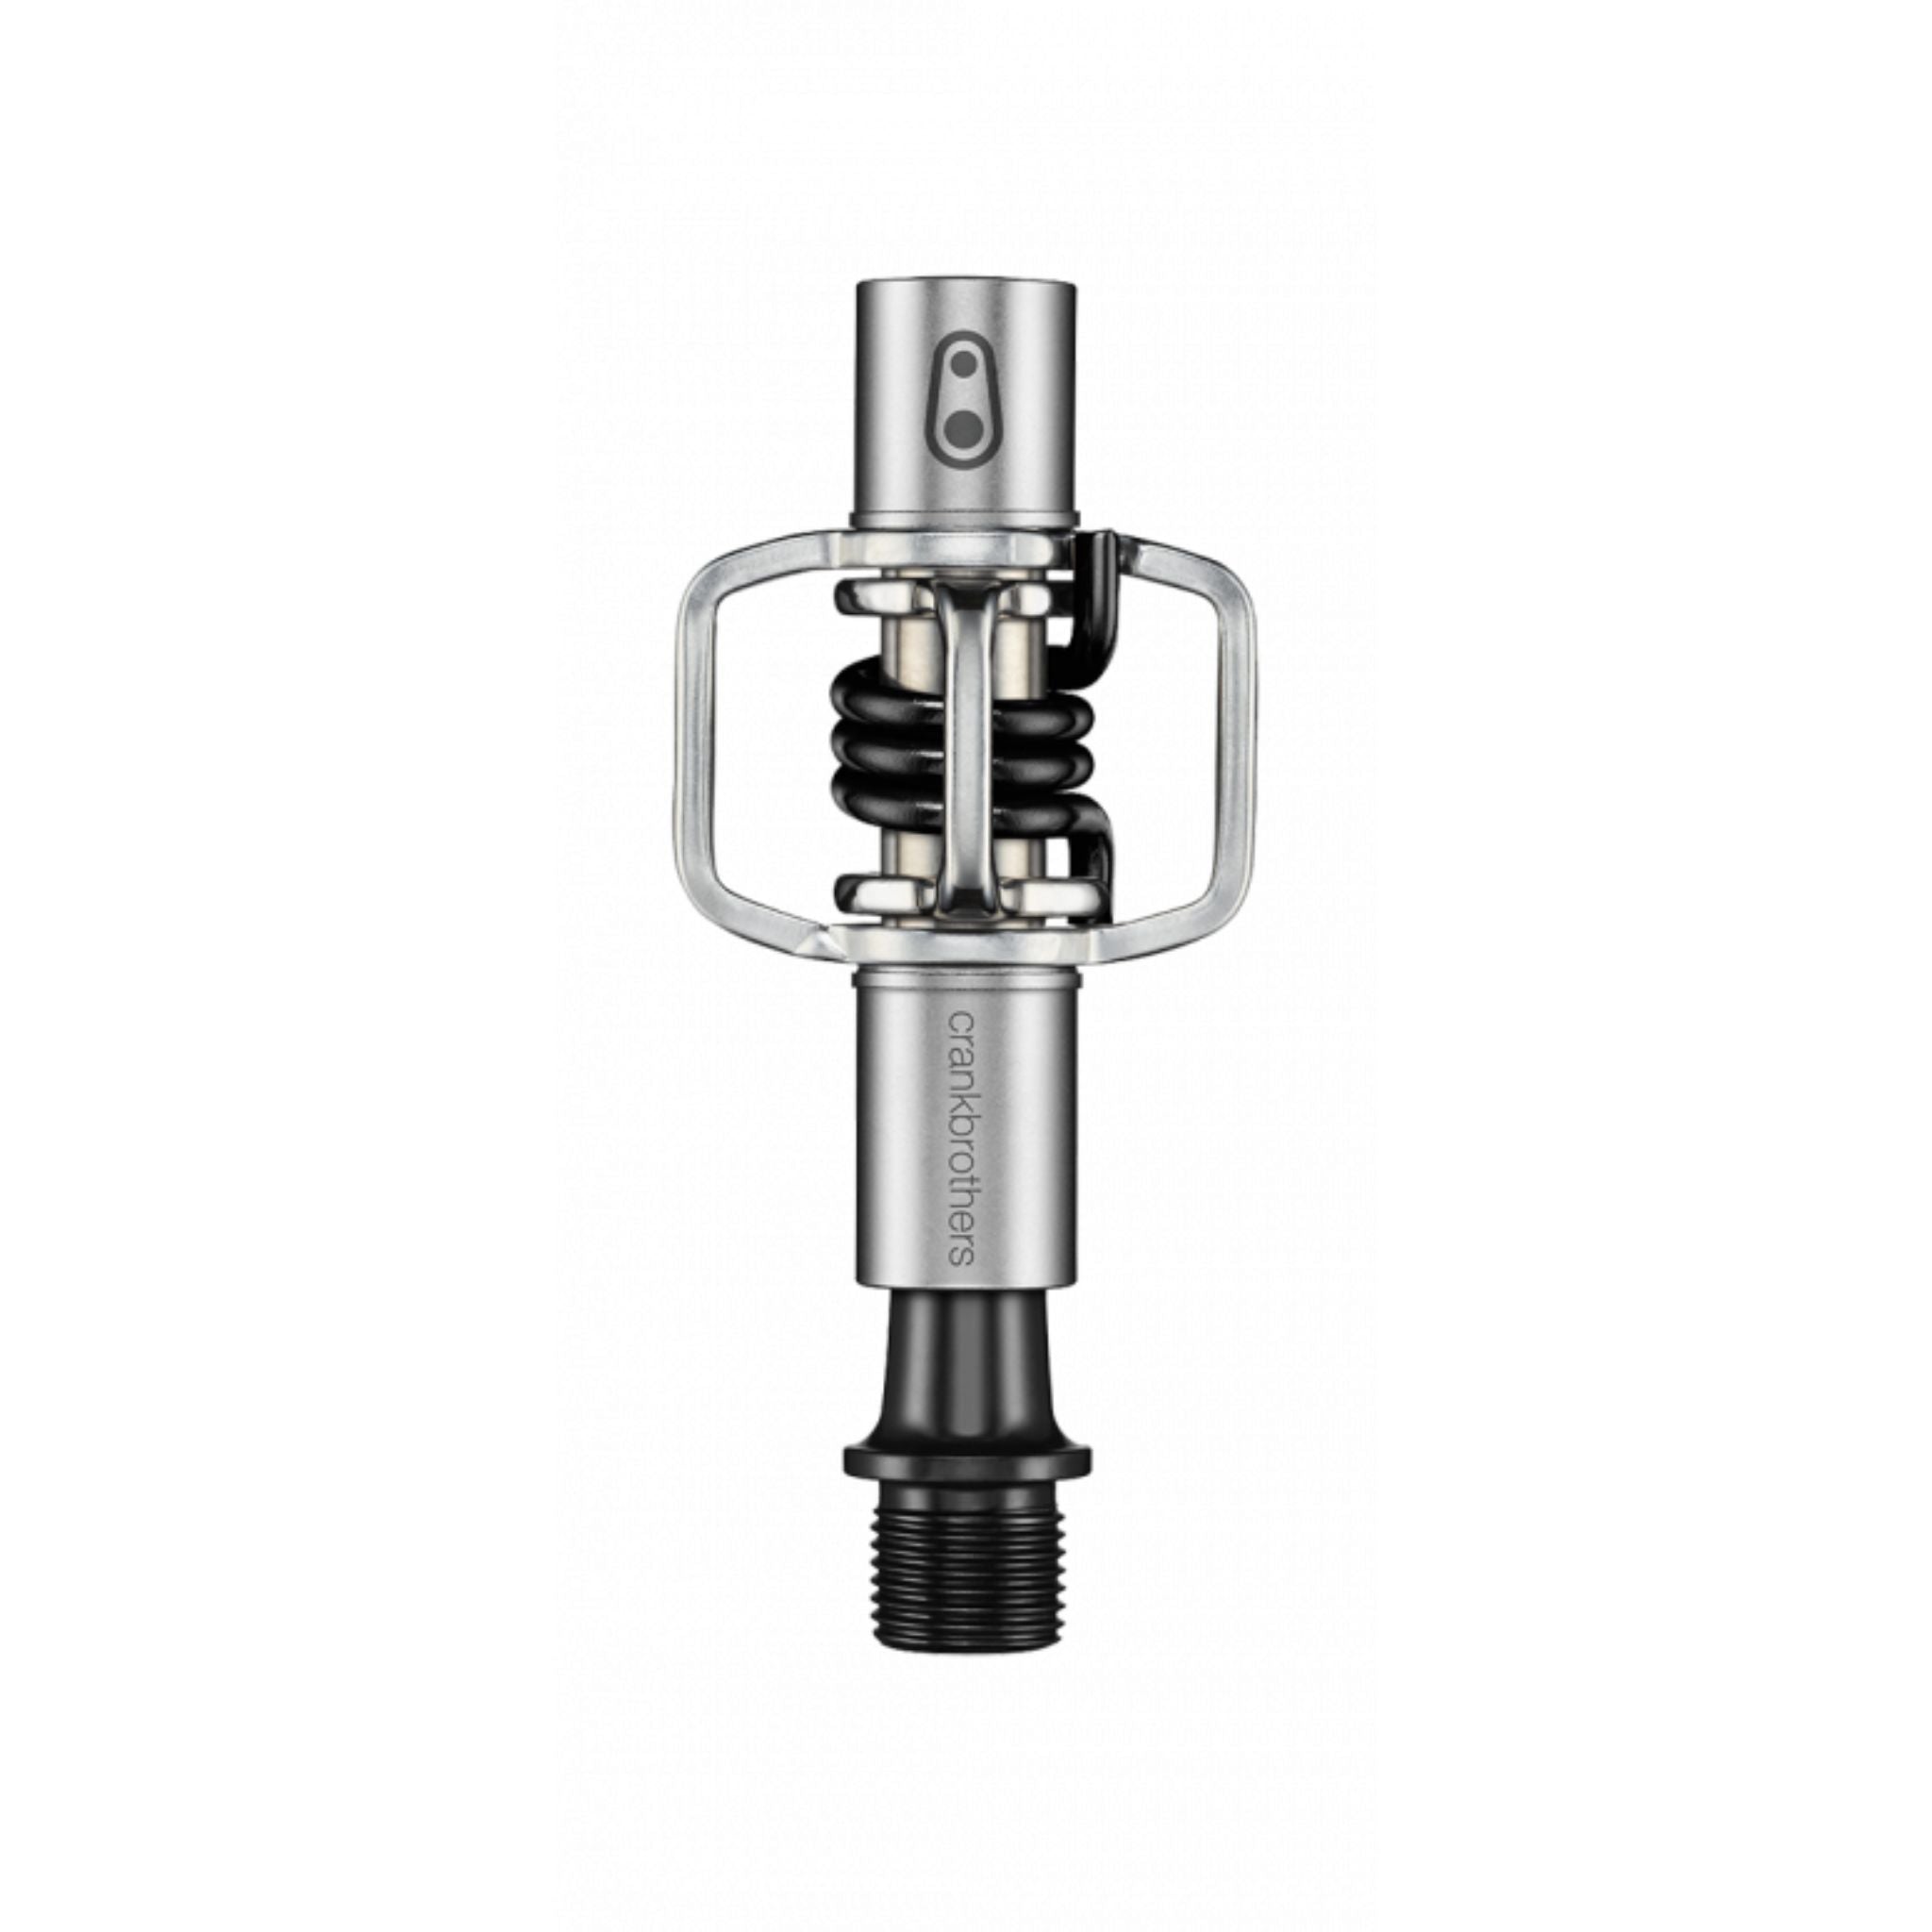 Crank Brothers Eggbeater 1 SPD Pedals - Silver/Black